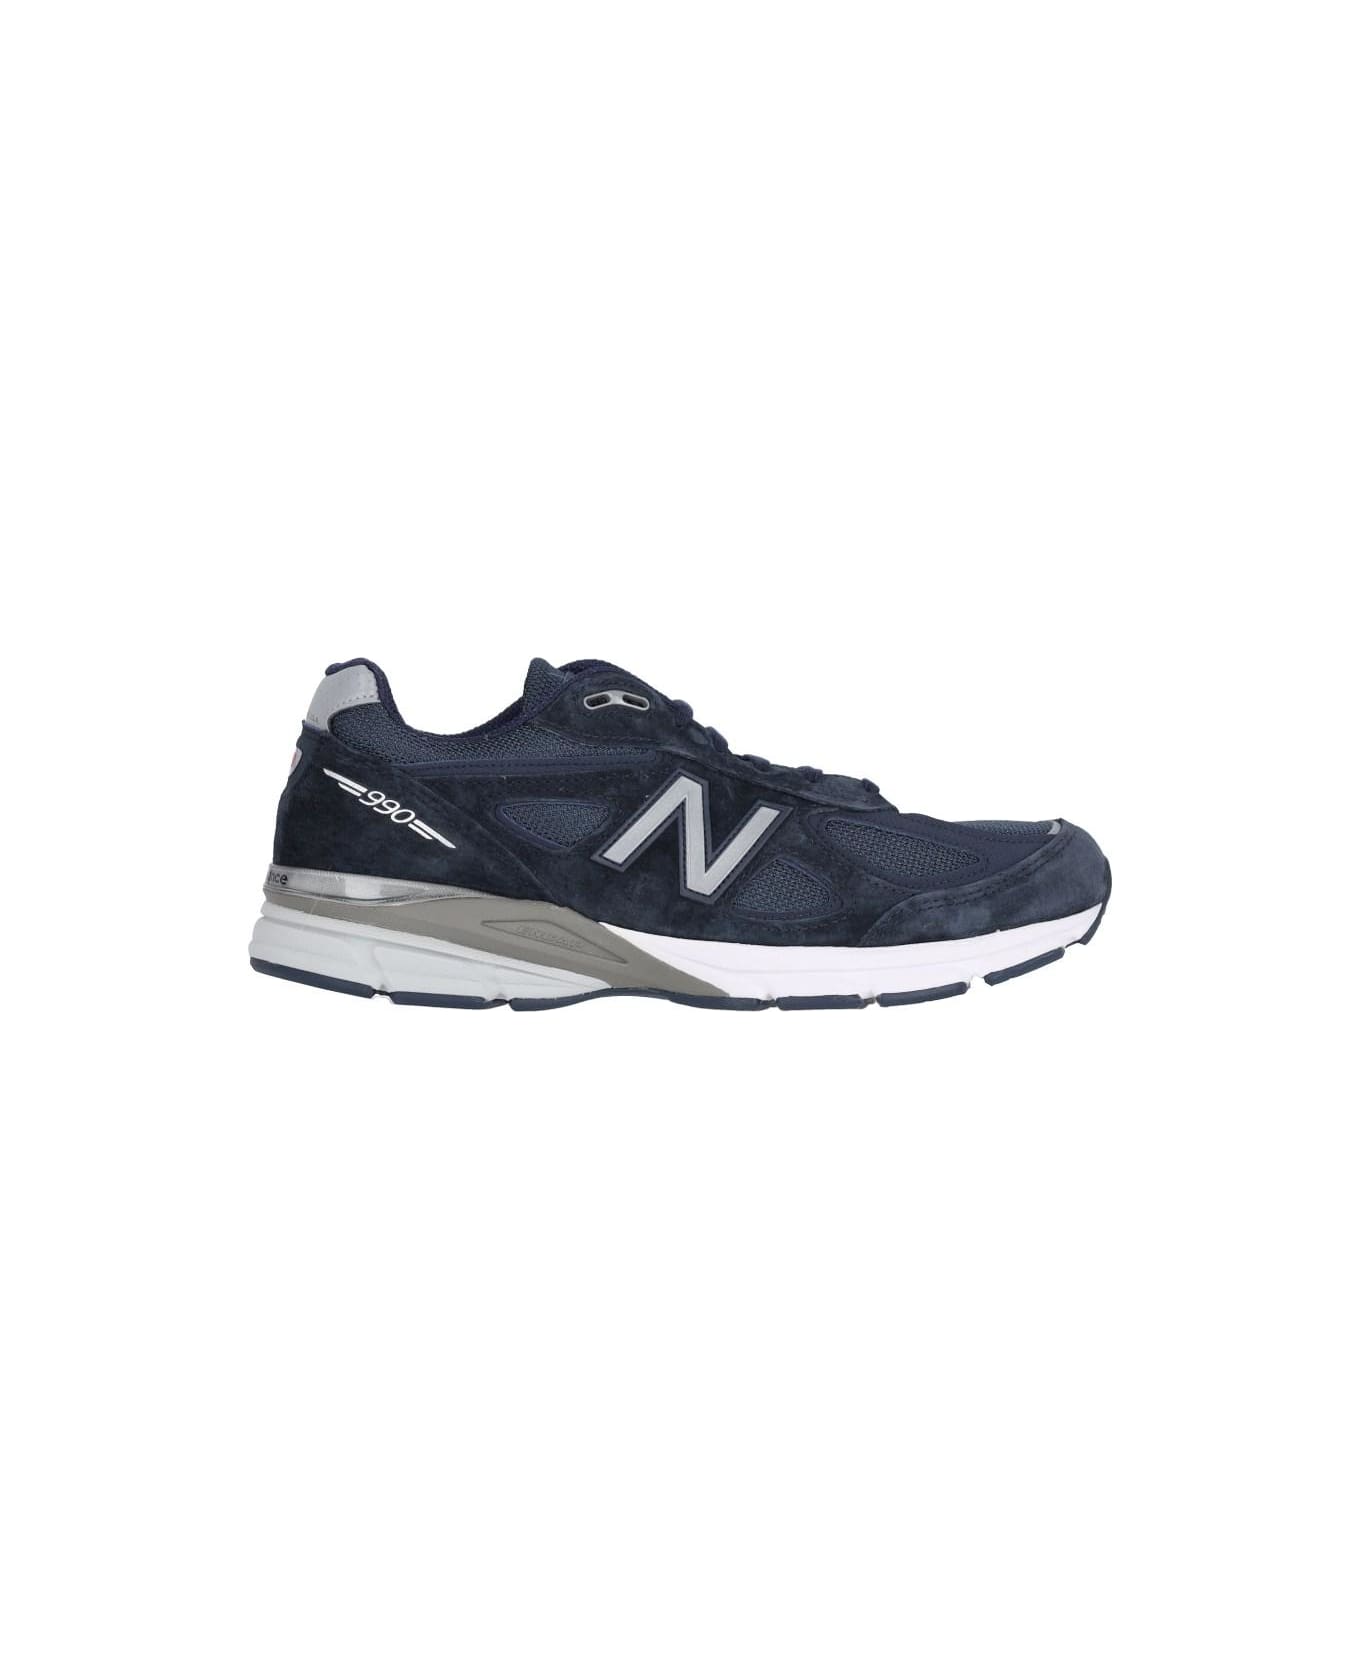 New Balance '990v4' Sneakers